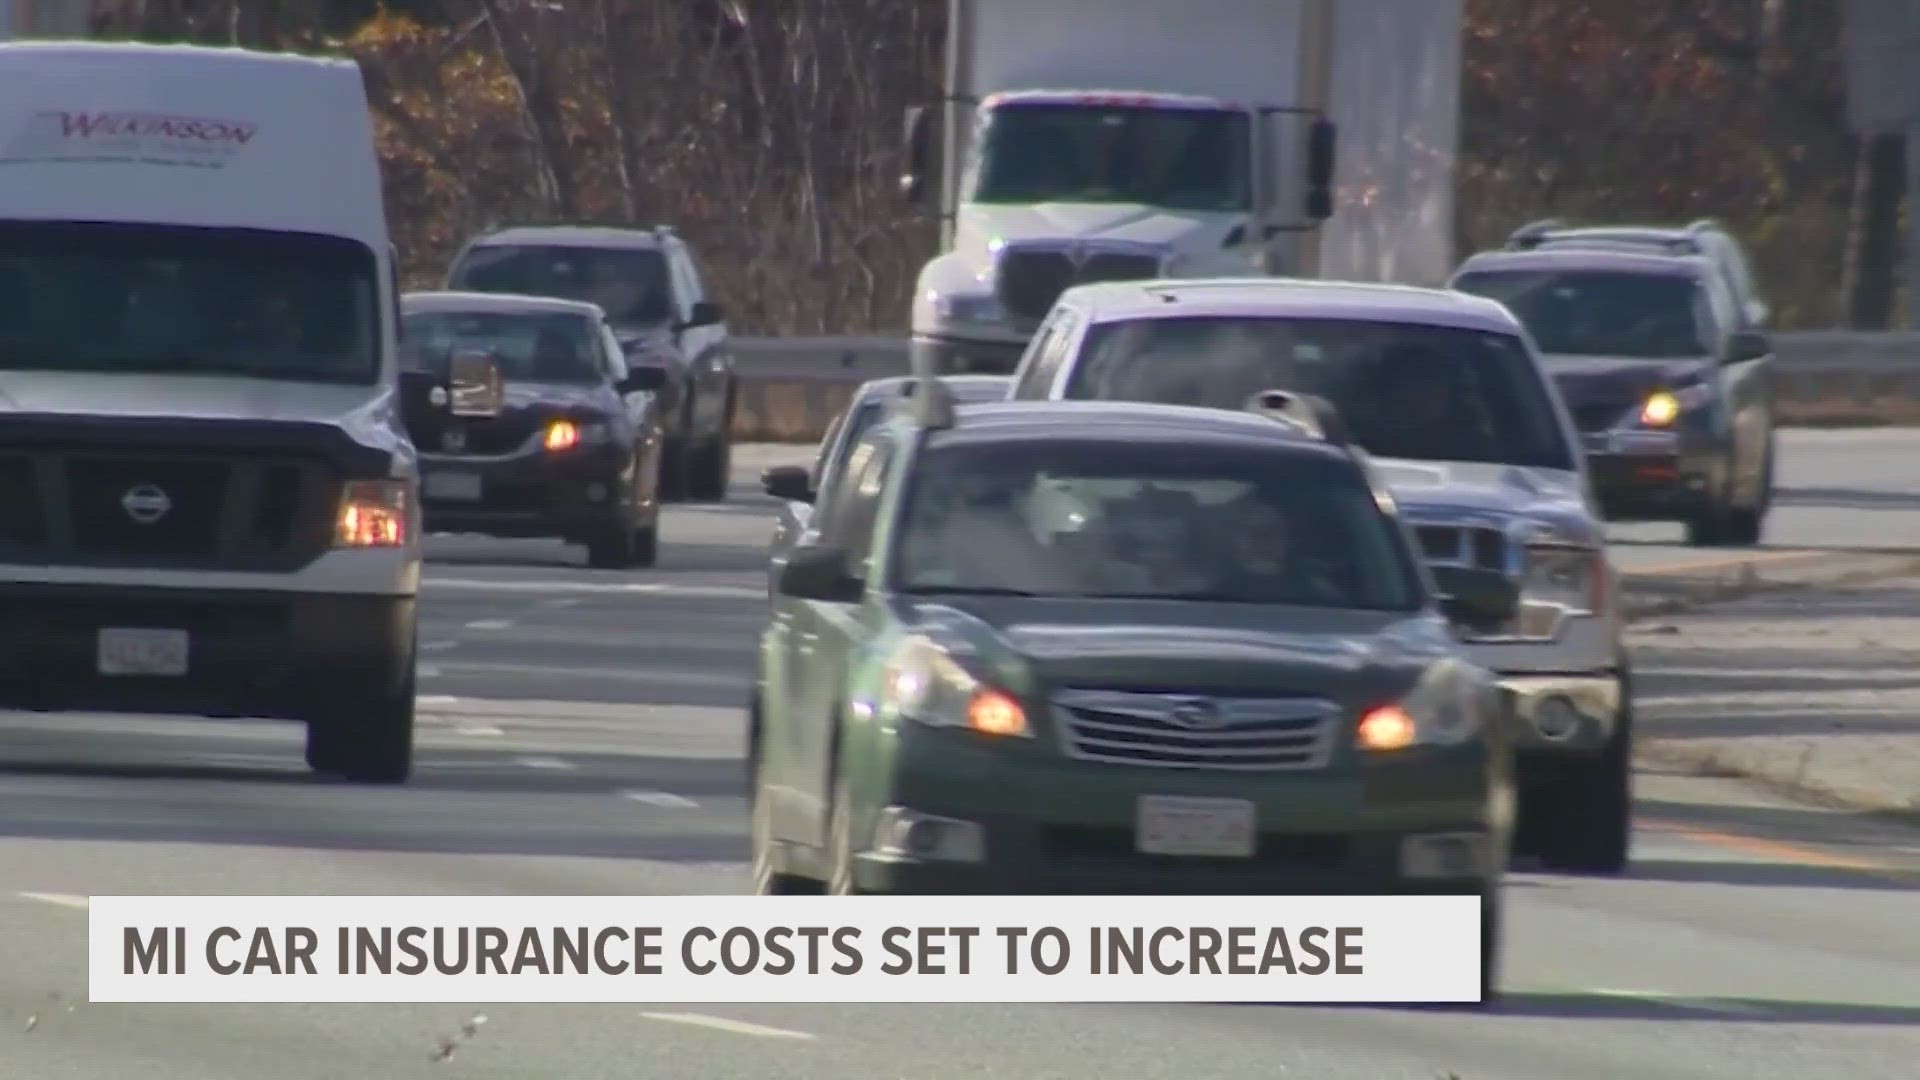 Higher insurance costs could be in the headlights for Michigan drivers.